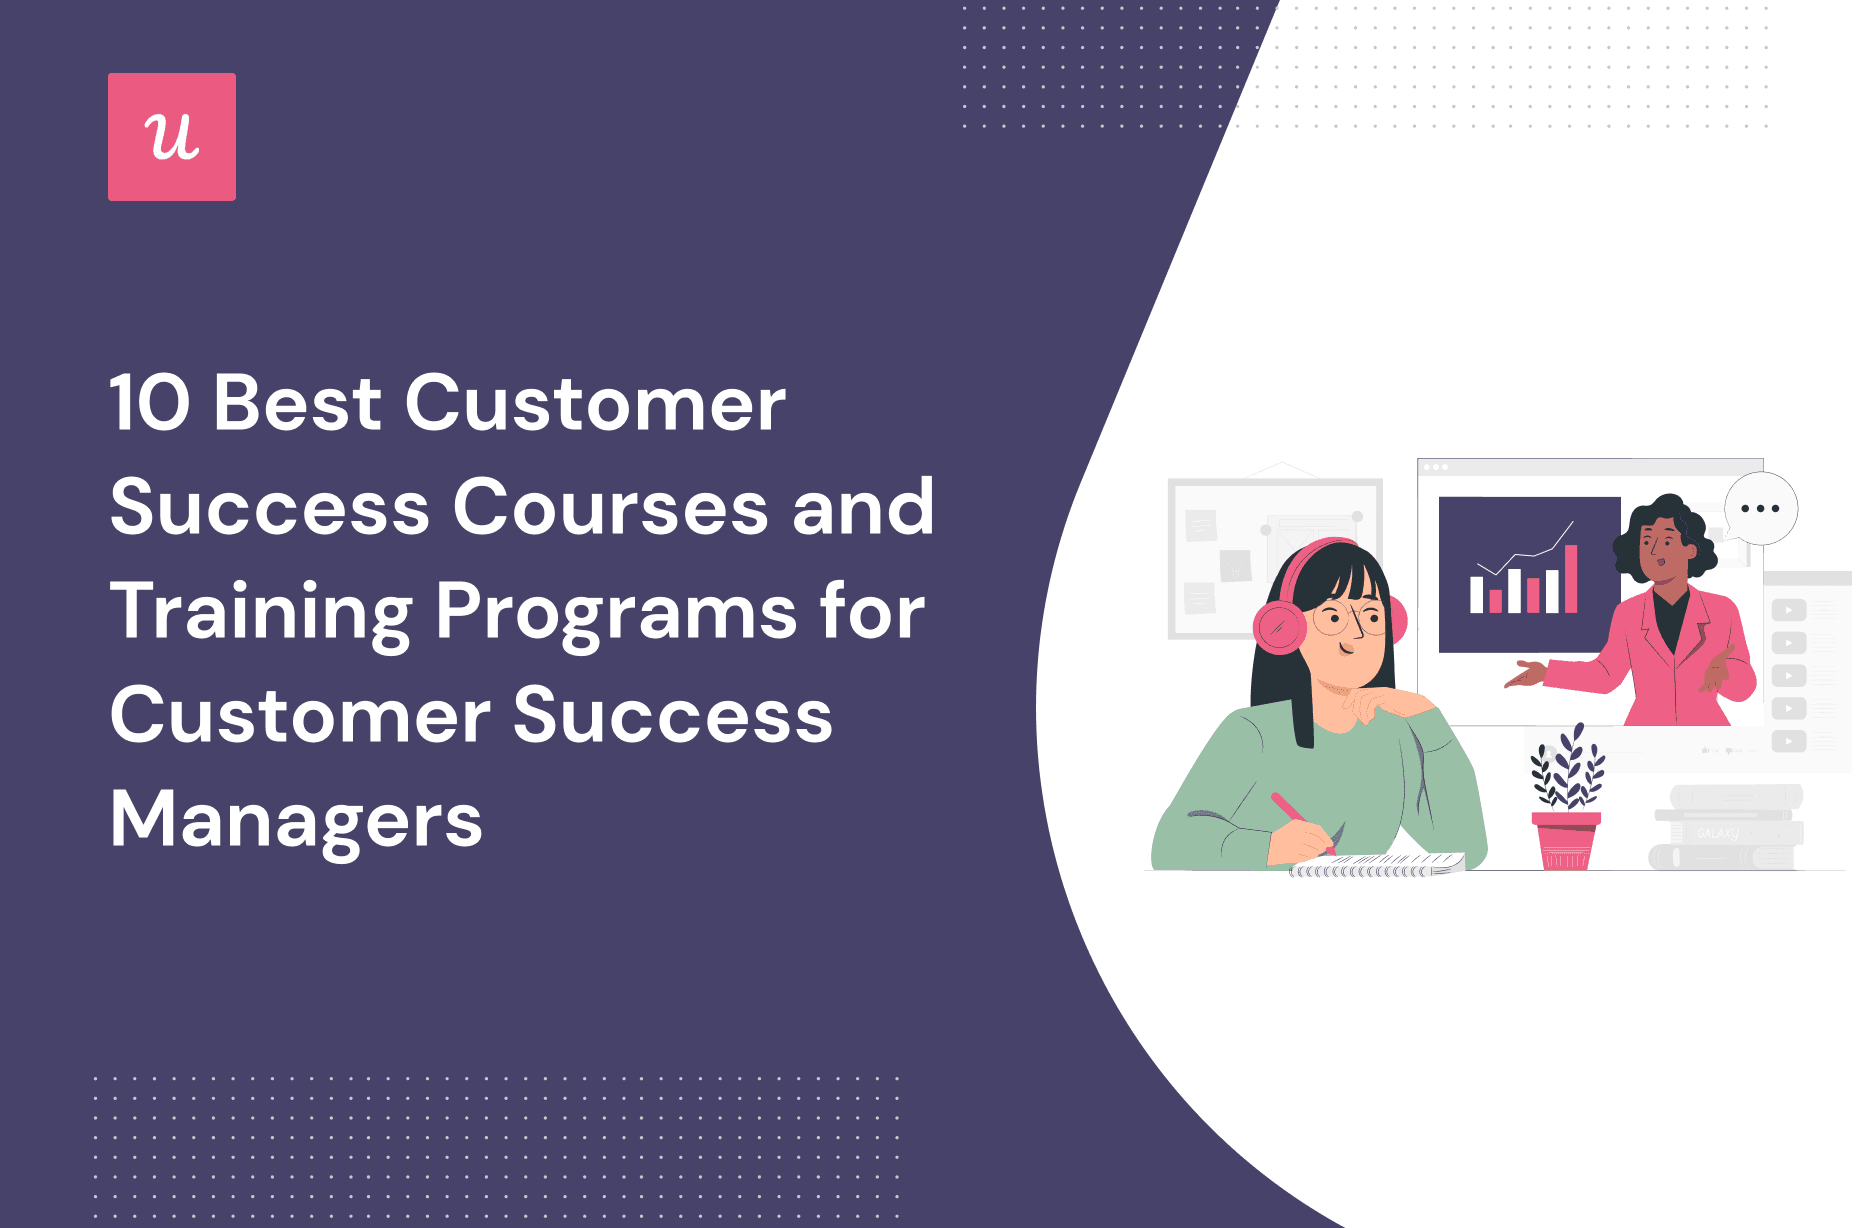 10 Best Customer Success Courses and Training Programs for Customer Success Managers cover